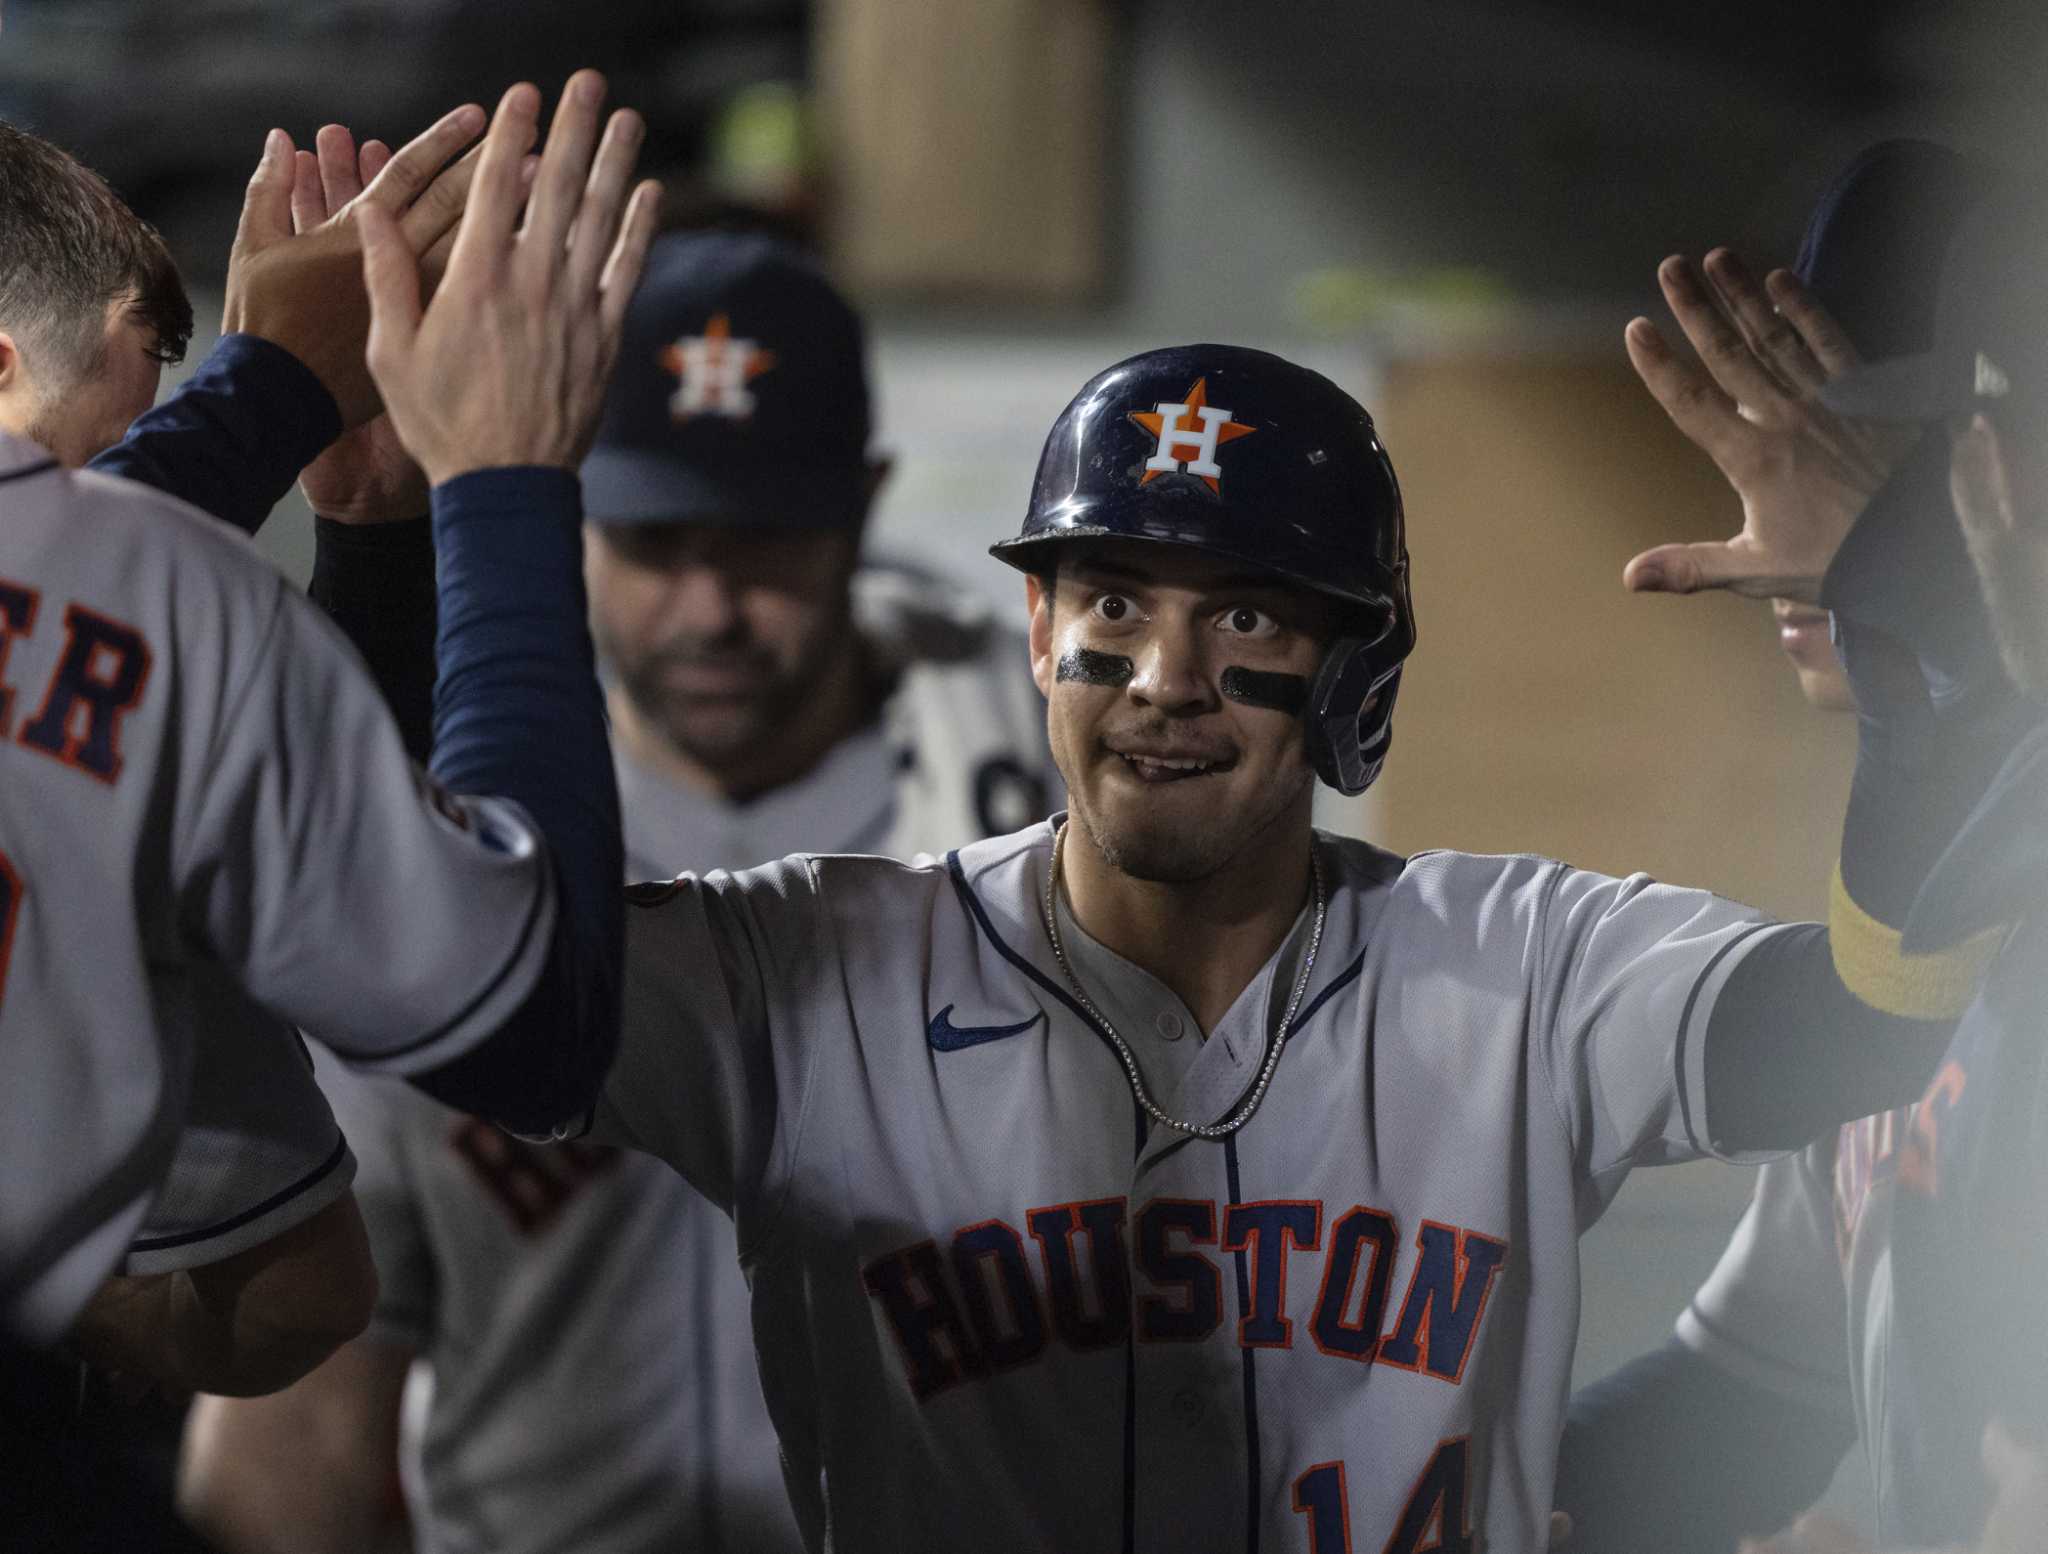 The Astros are proving they have an all-time great lineup, with or without  sign stealing